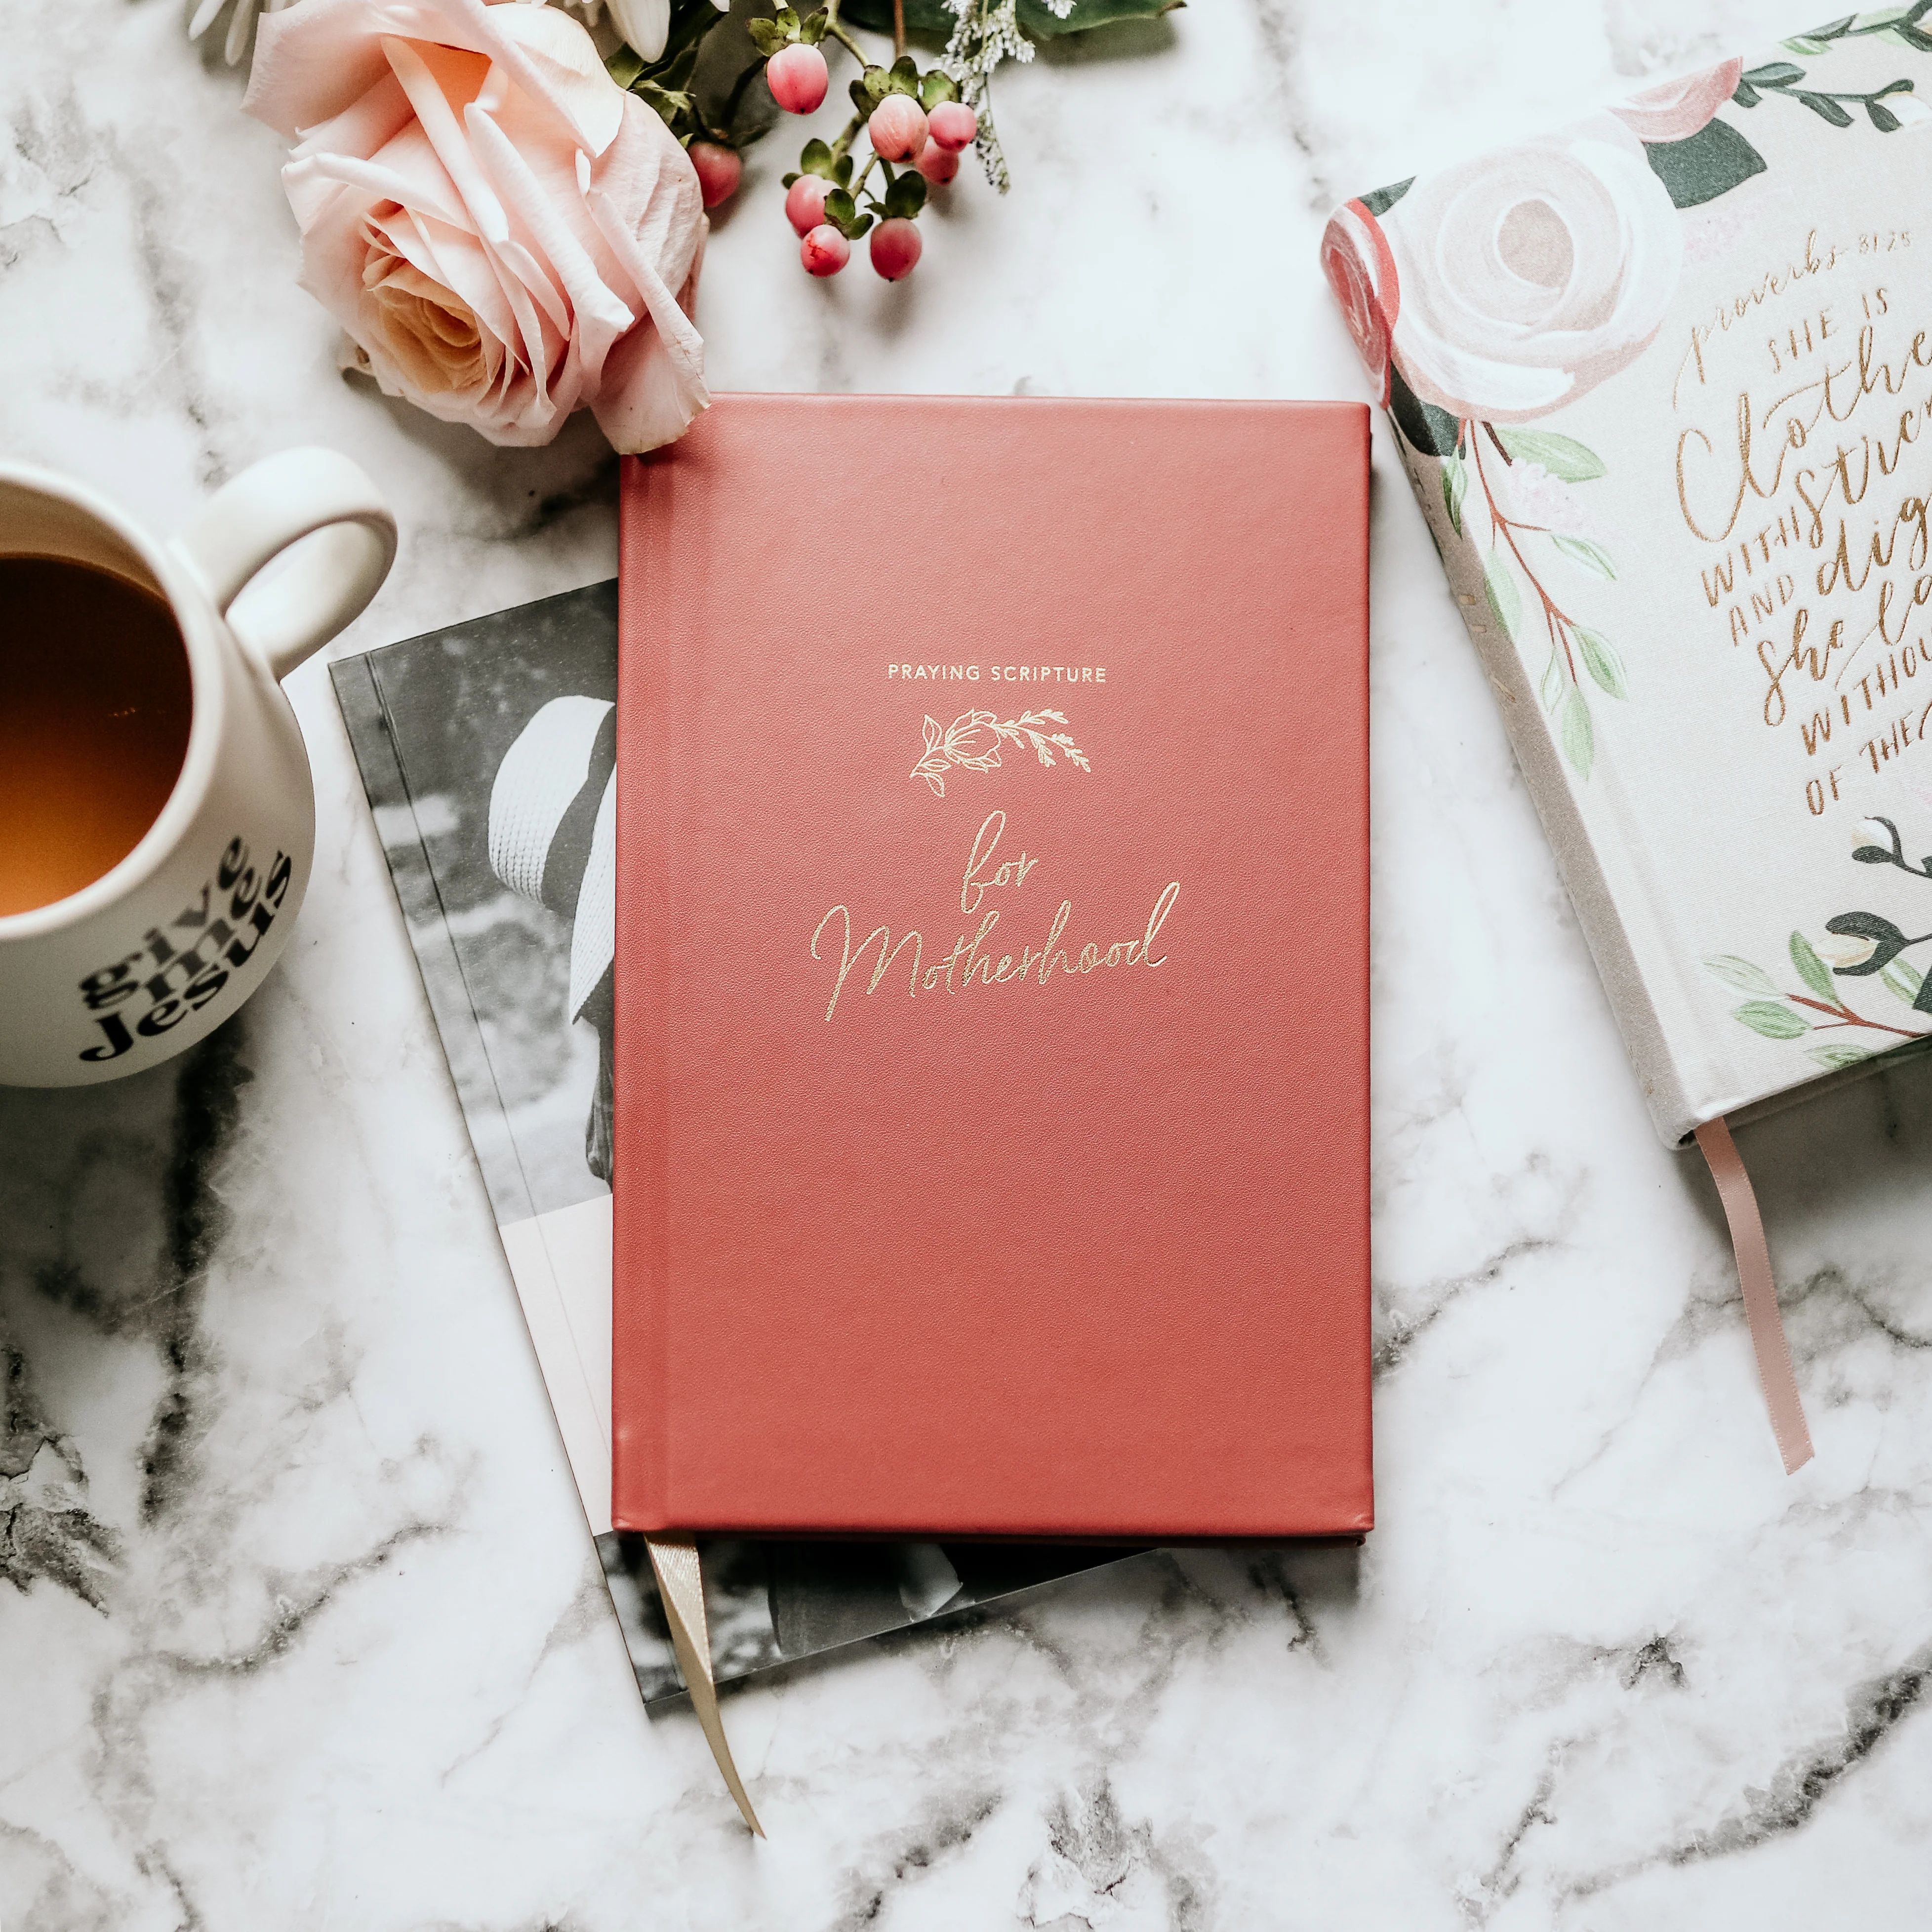 Praying Scripture for Motherhood Journal | The Daily Grace Co.